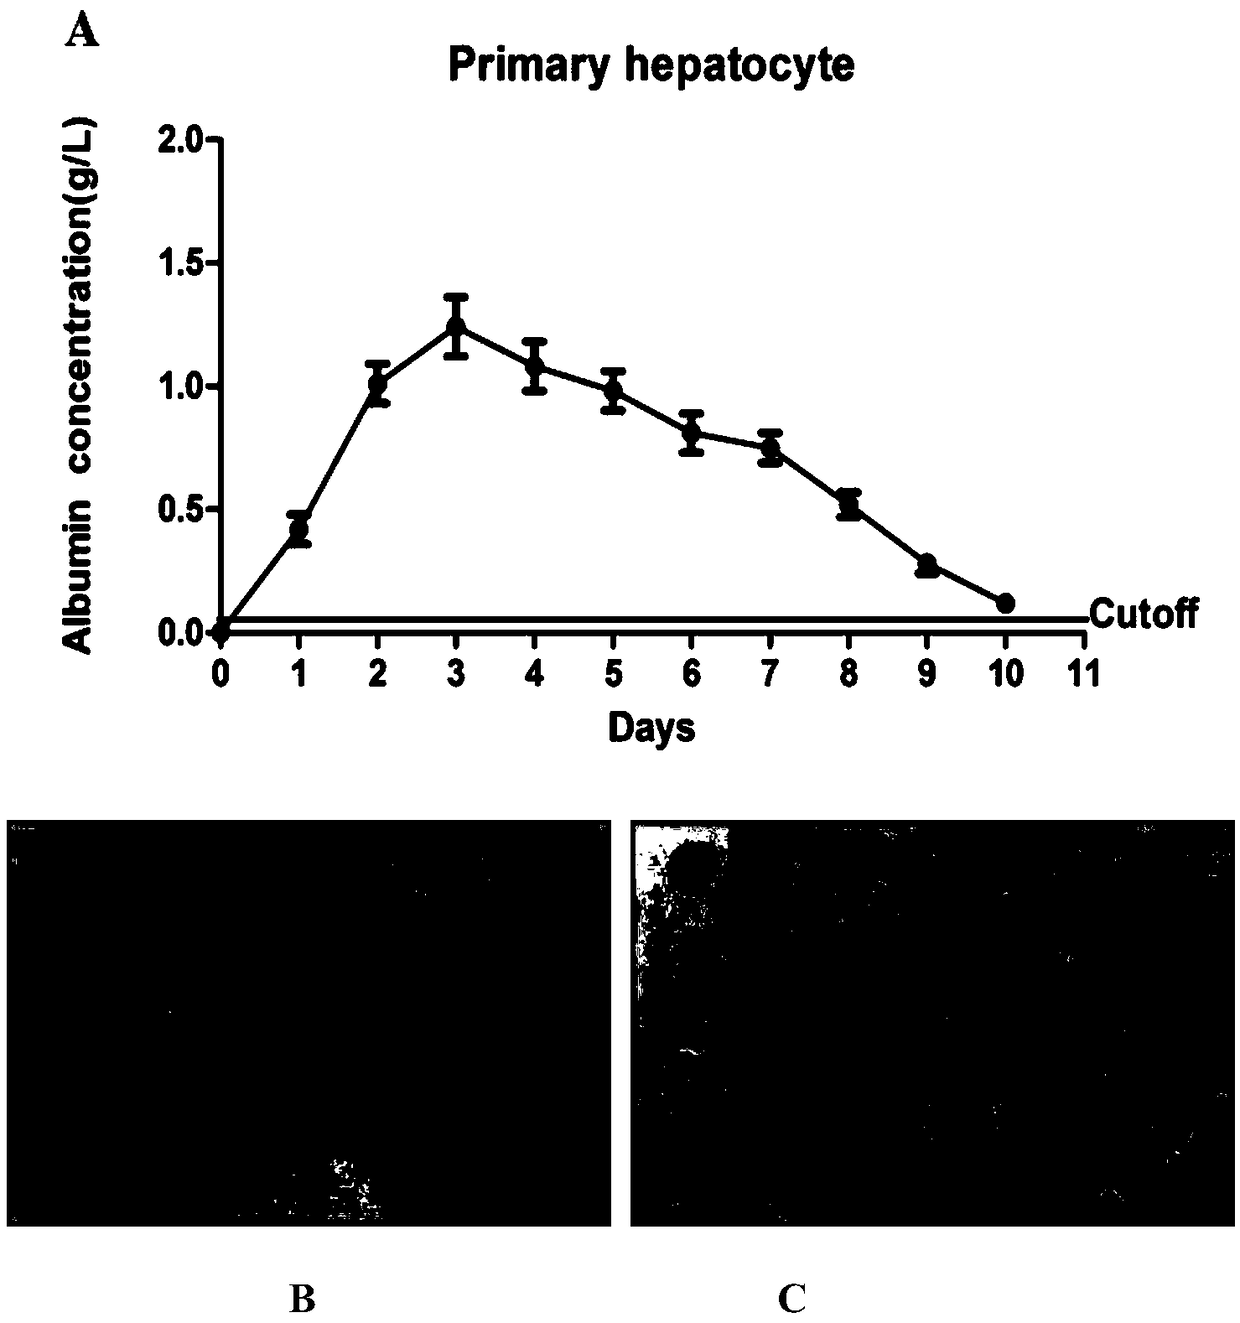 Method for separating, culturing and identifying primary hepatocytes of HBV transgenic mouse